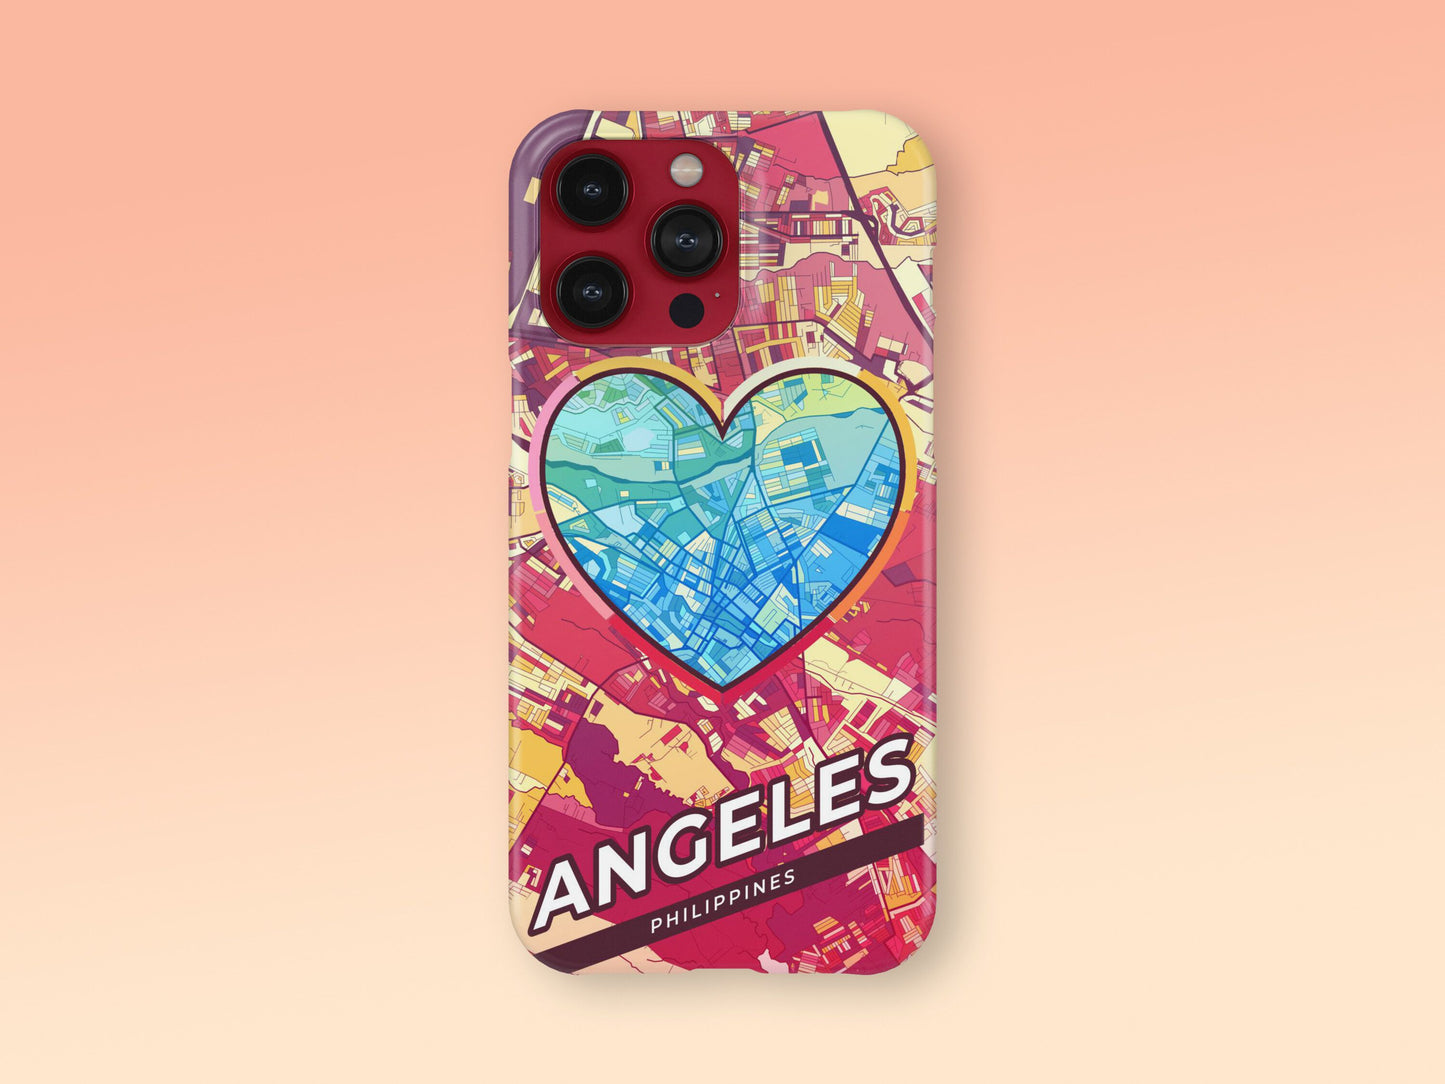 Angeles Philippines slim phone case with colorful icon. Birthday, wedding or housewarming gift. Couple match cases. 2